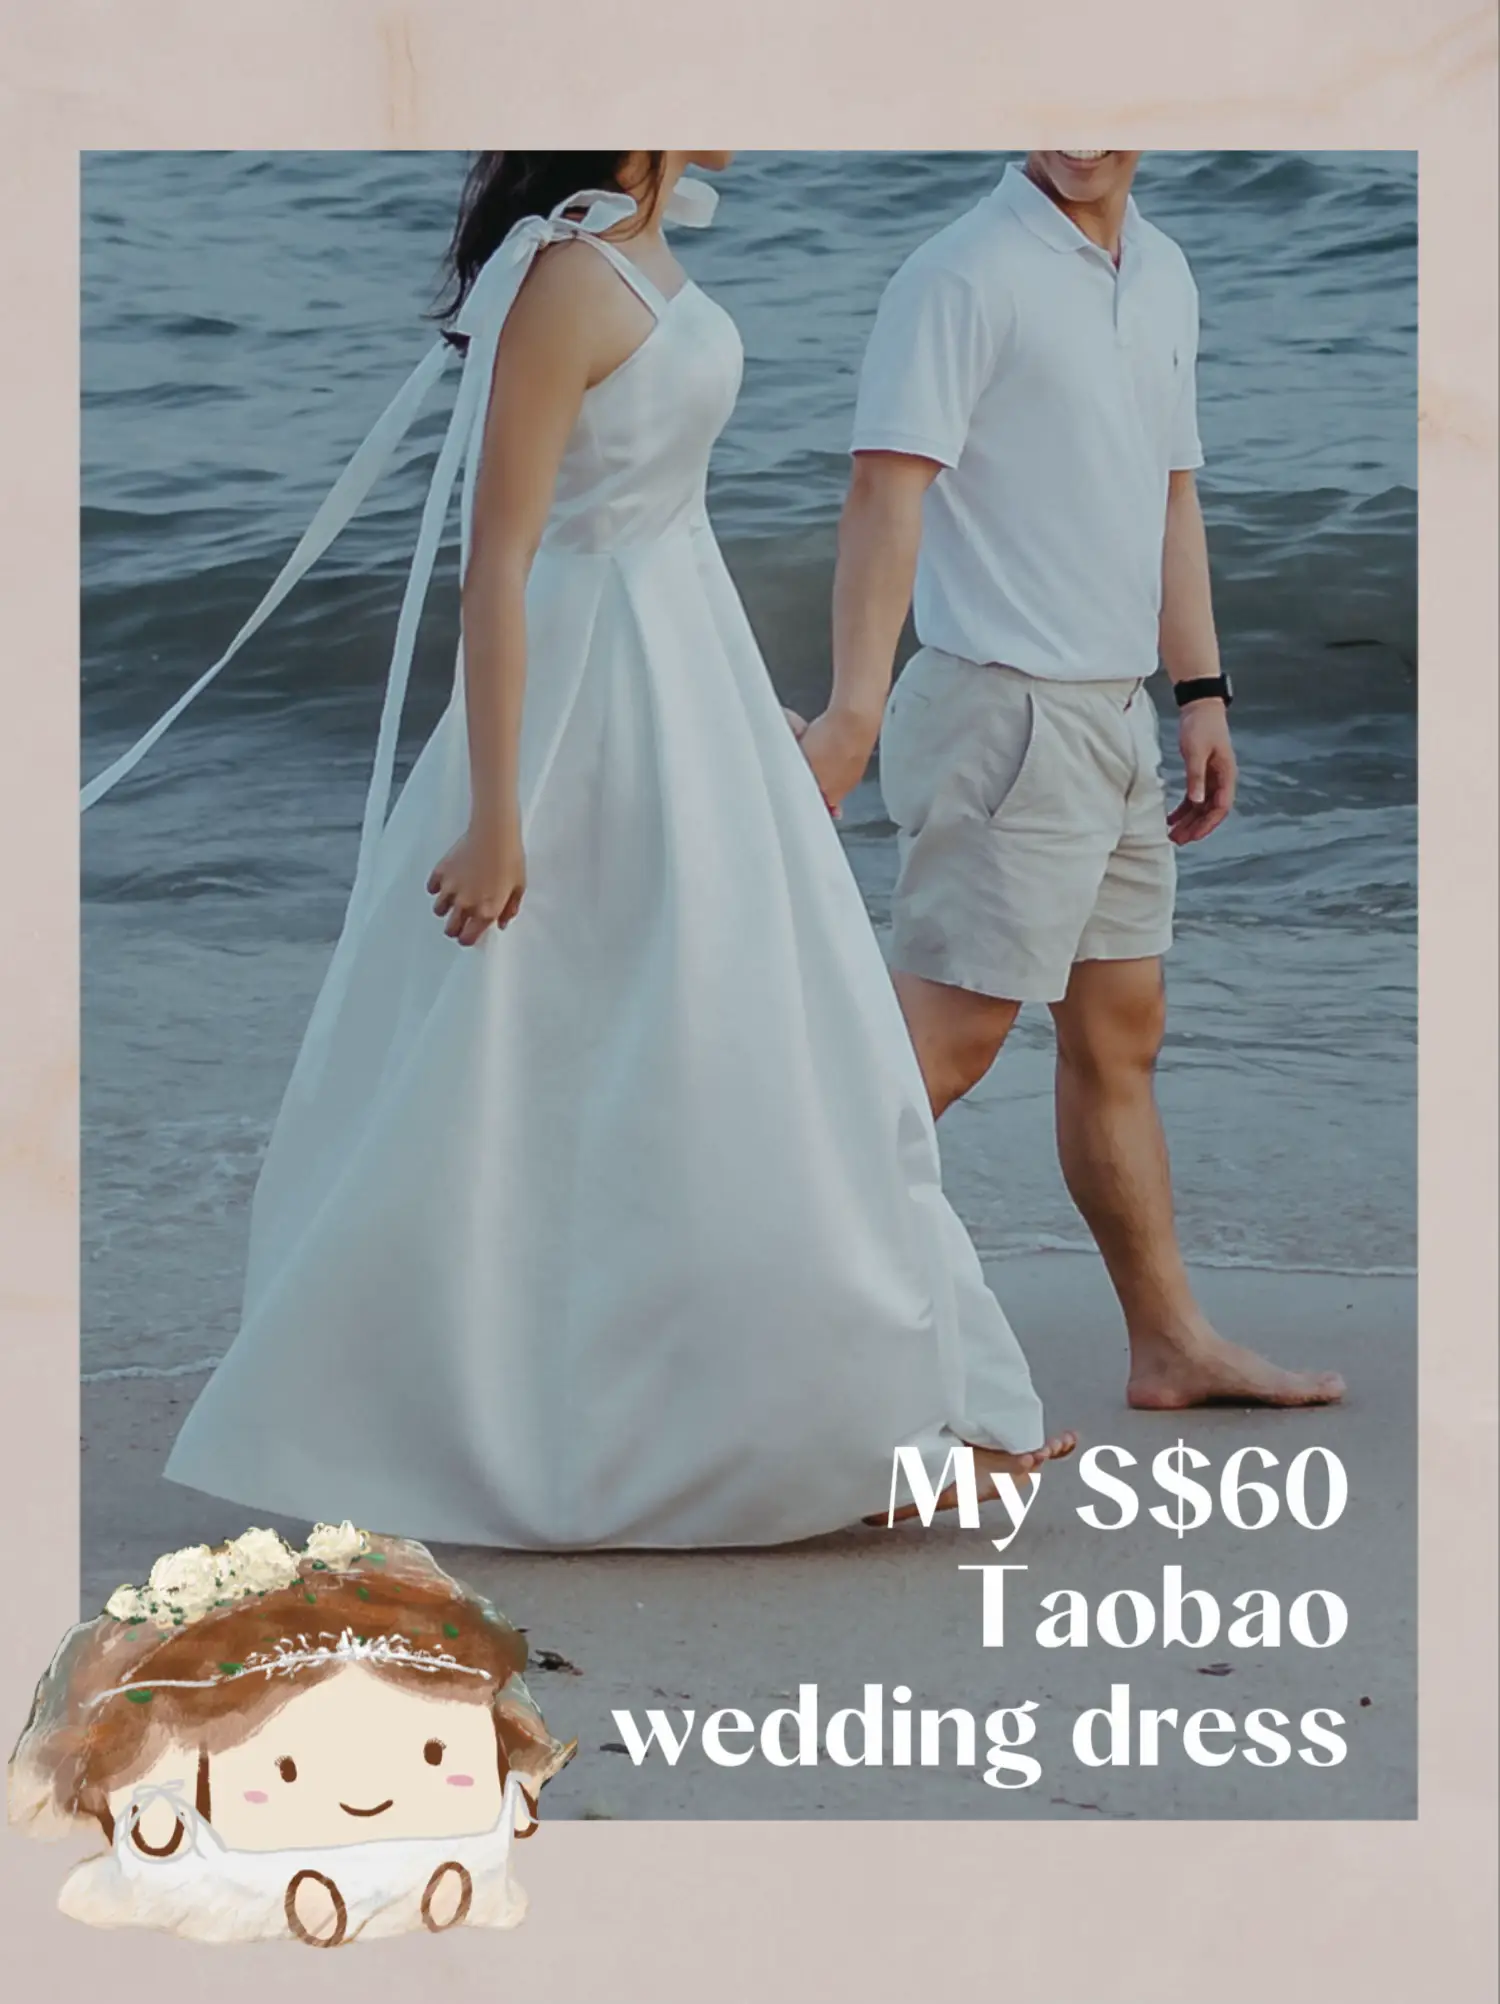 Quality wedding dress for just $60 👰🏻‍♀️ 's images